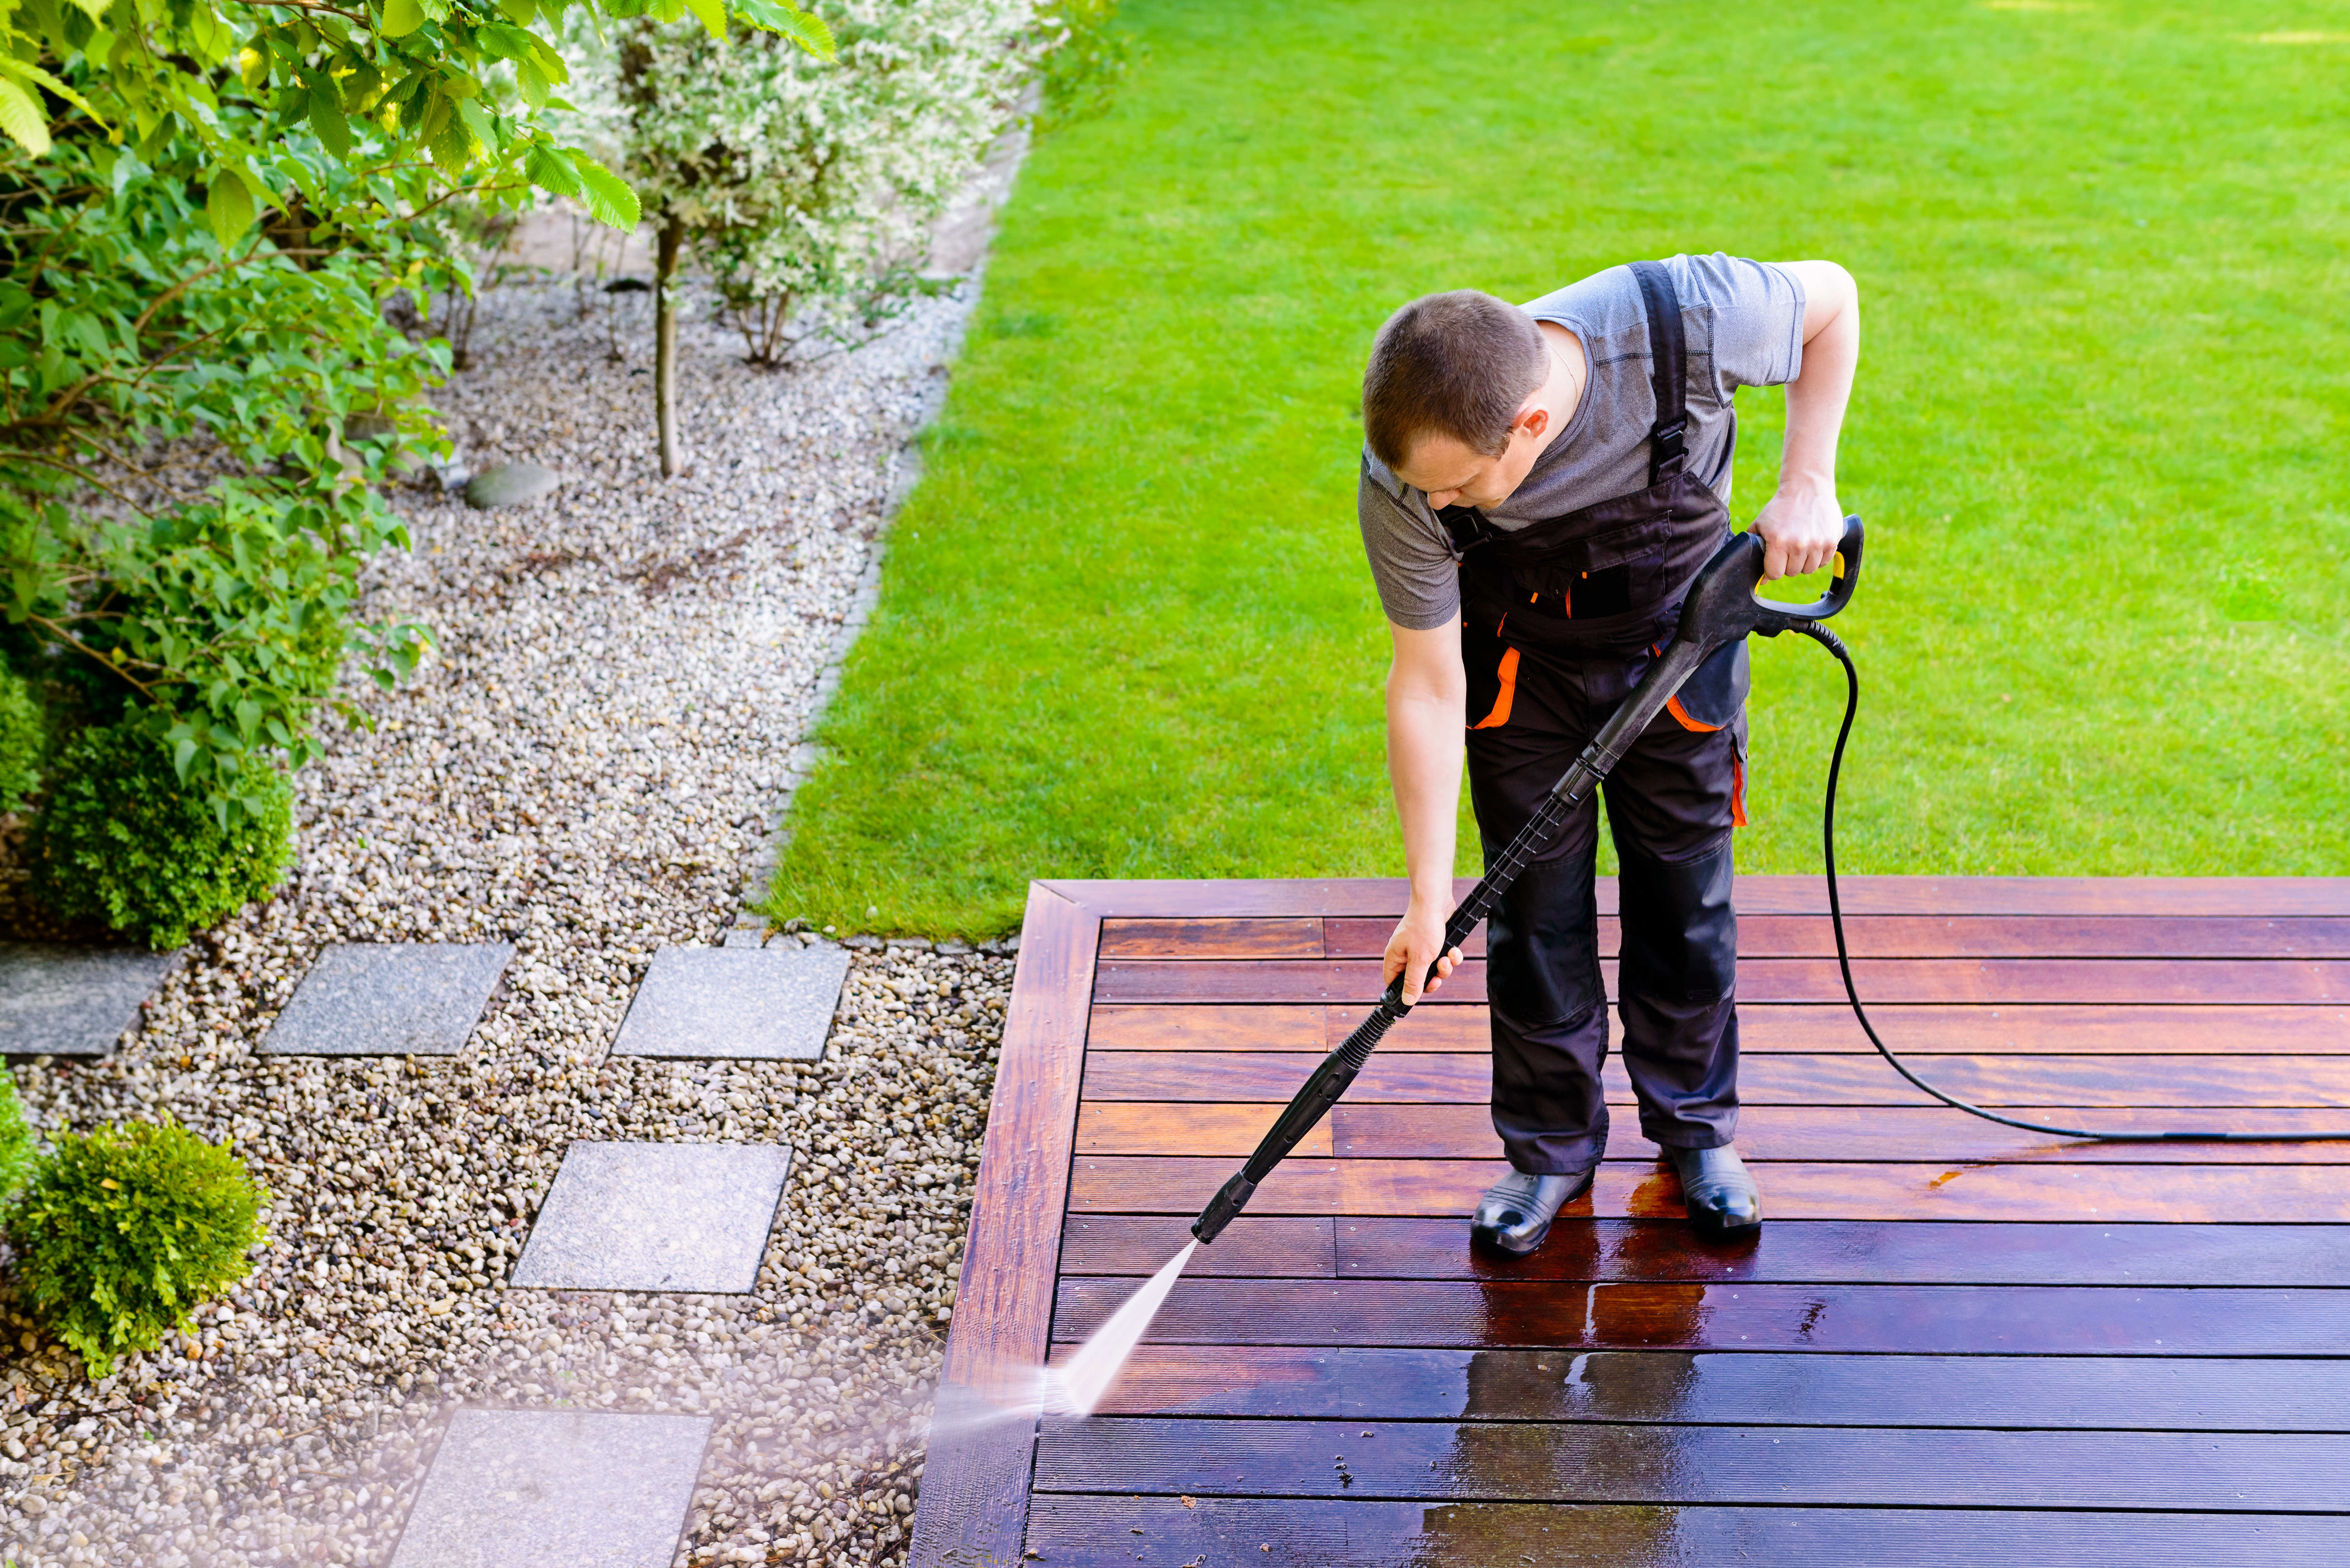 Pressure washers that will do the dirty work for you